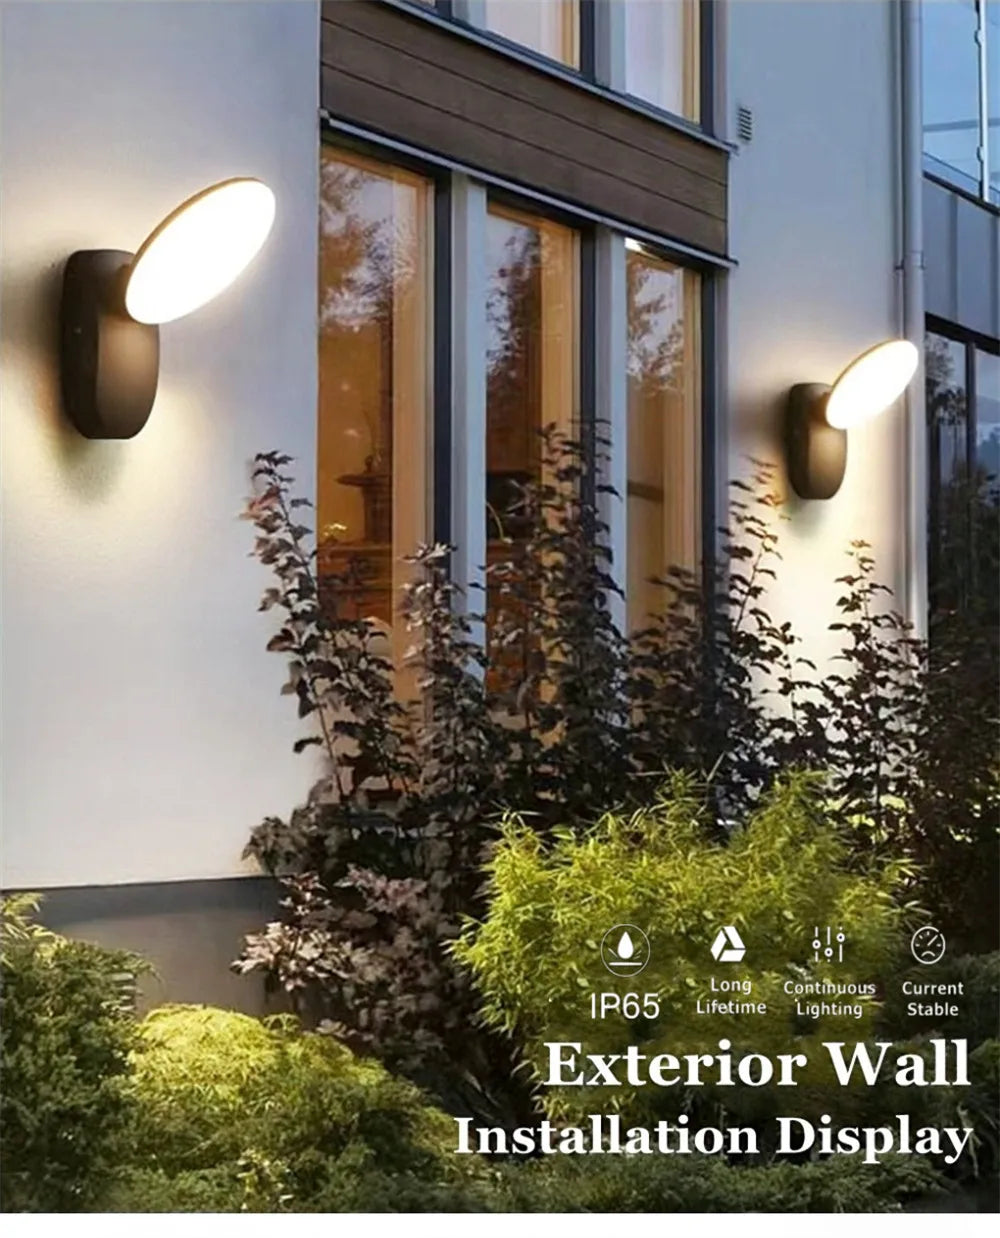 LED Wall Light, Durable IP65-rated lighting for exterior walls with stable performance and long lifetime.